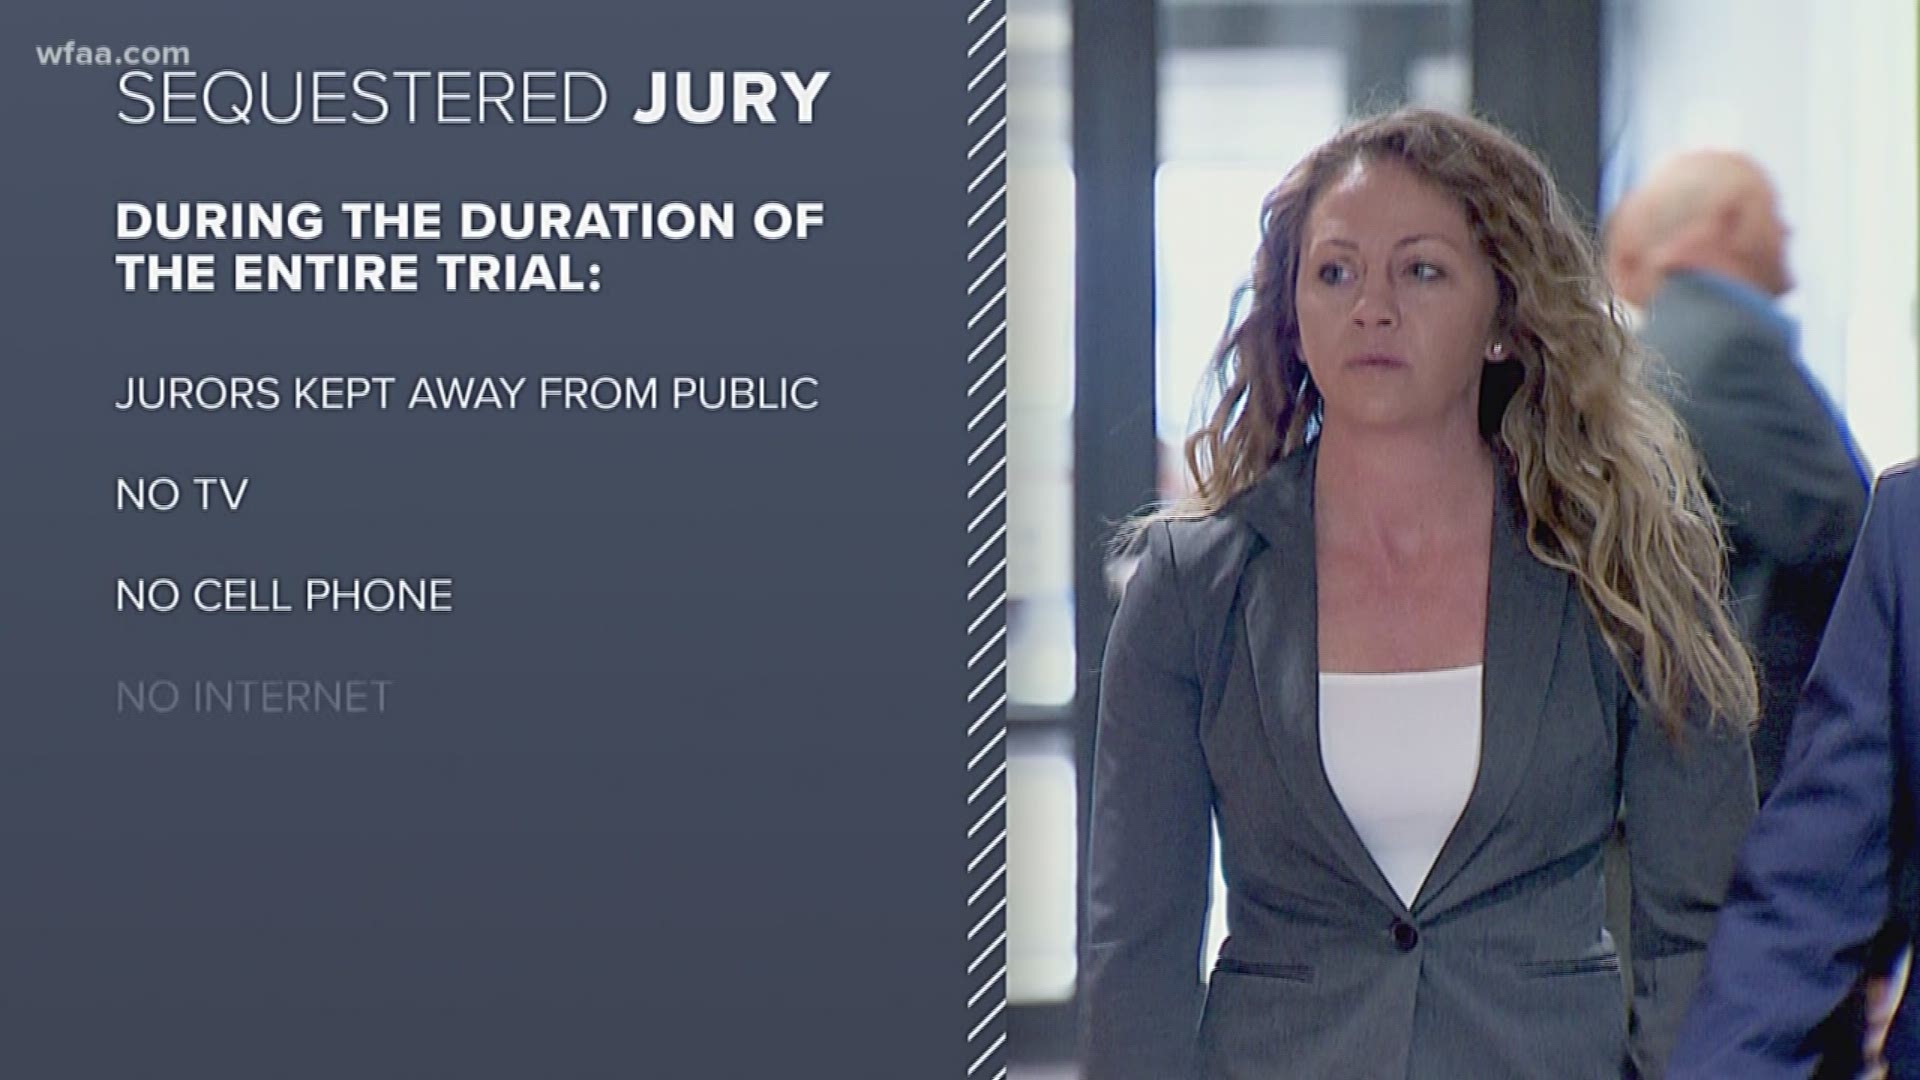 The jury selected in the Amber Guyger trial will likely be sequestered for the duration of the case, said State District Judge Tammy Kemp on Friday. WFAA's Tanya Eiserer explains what that means.